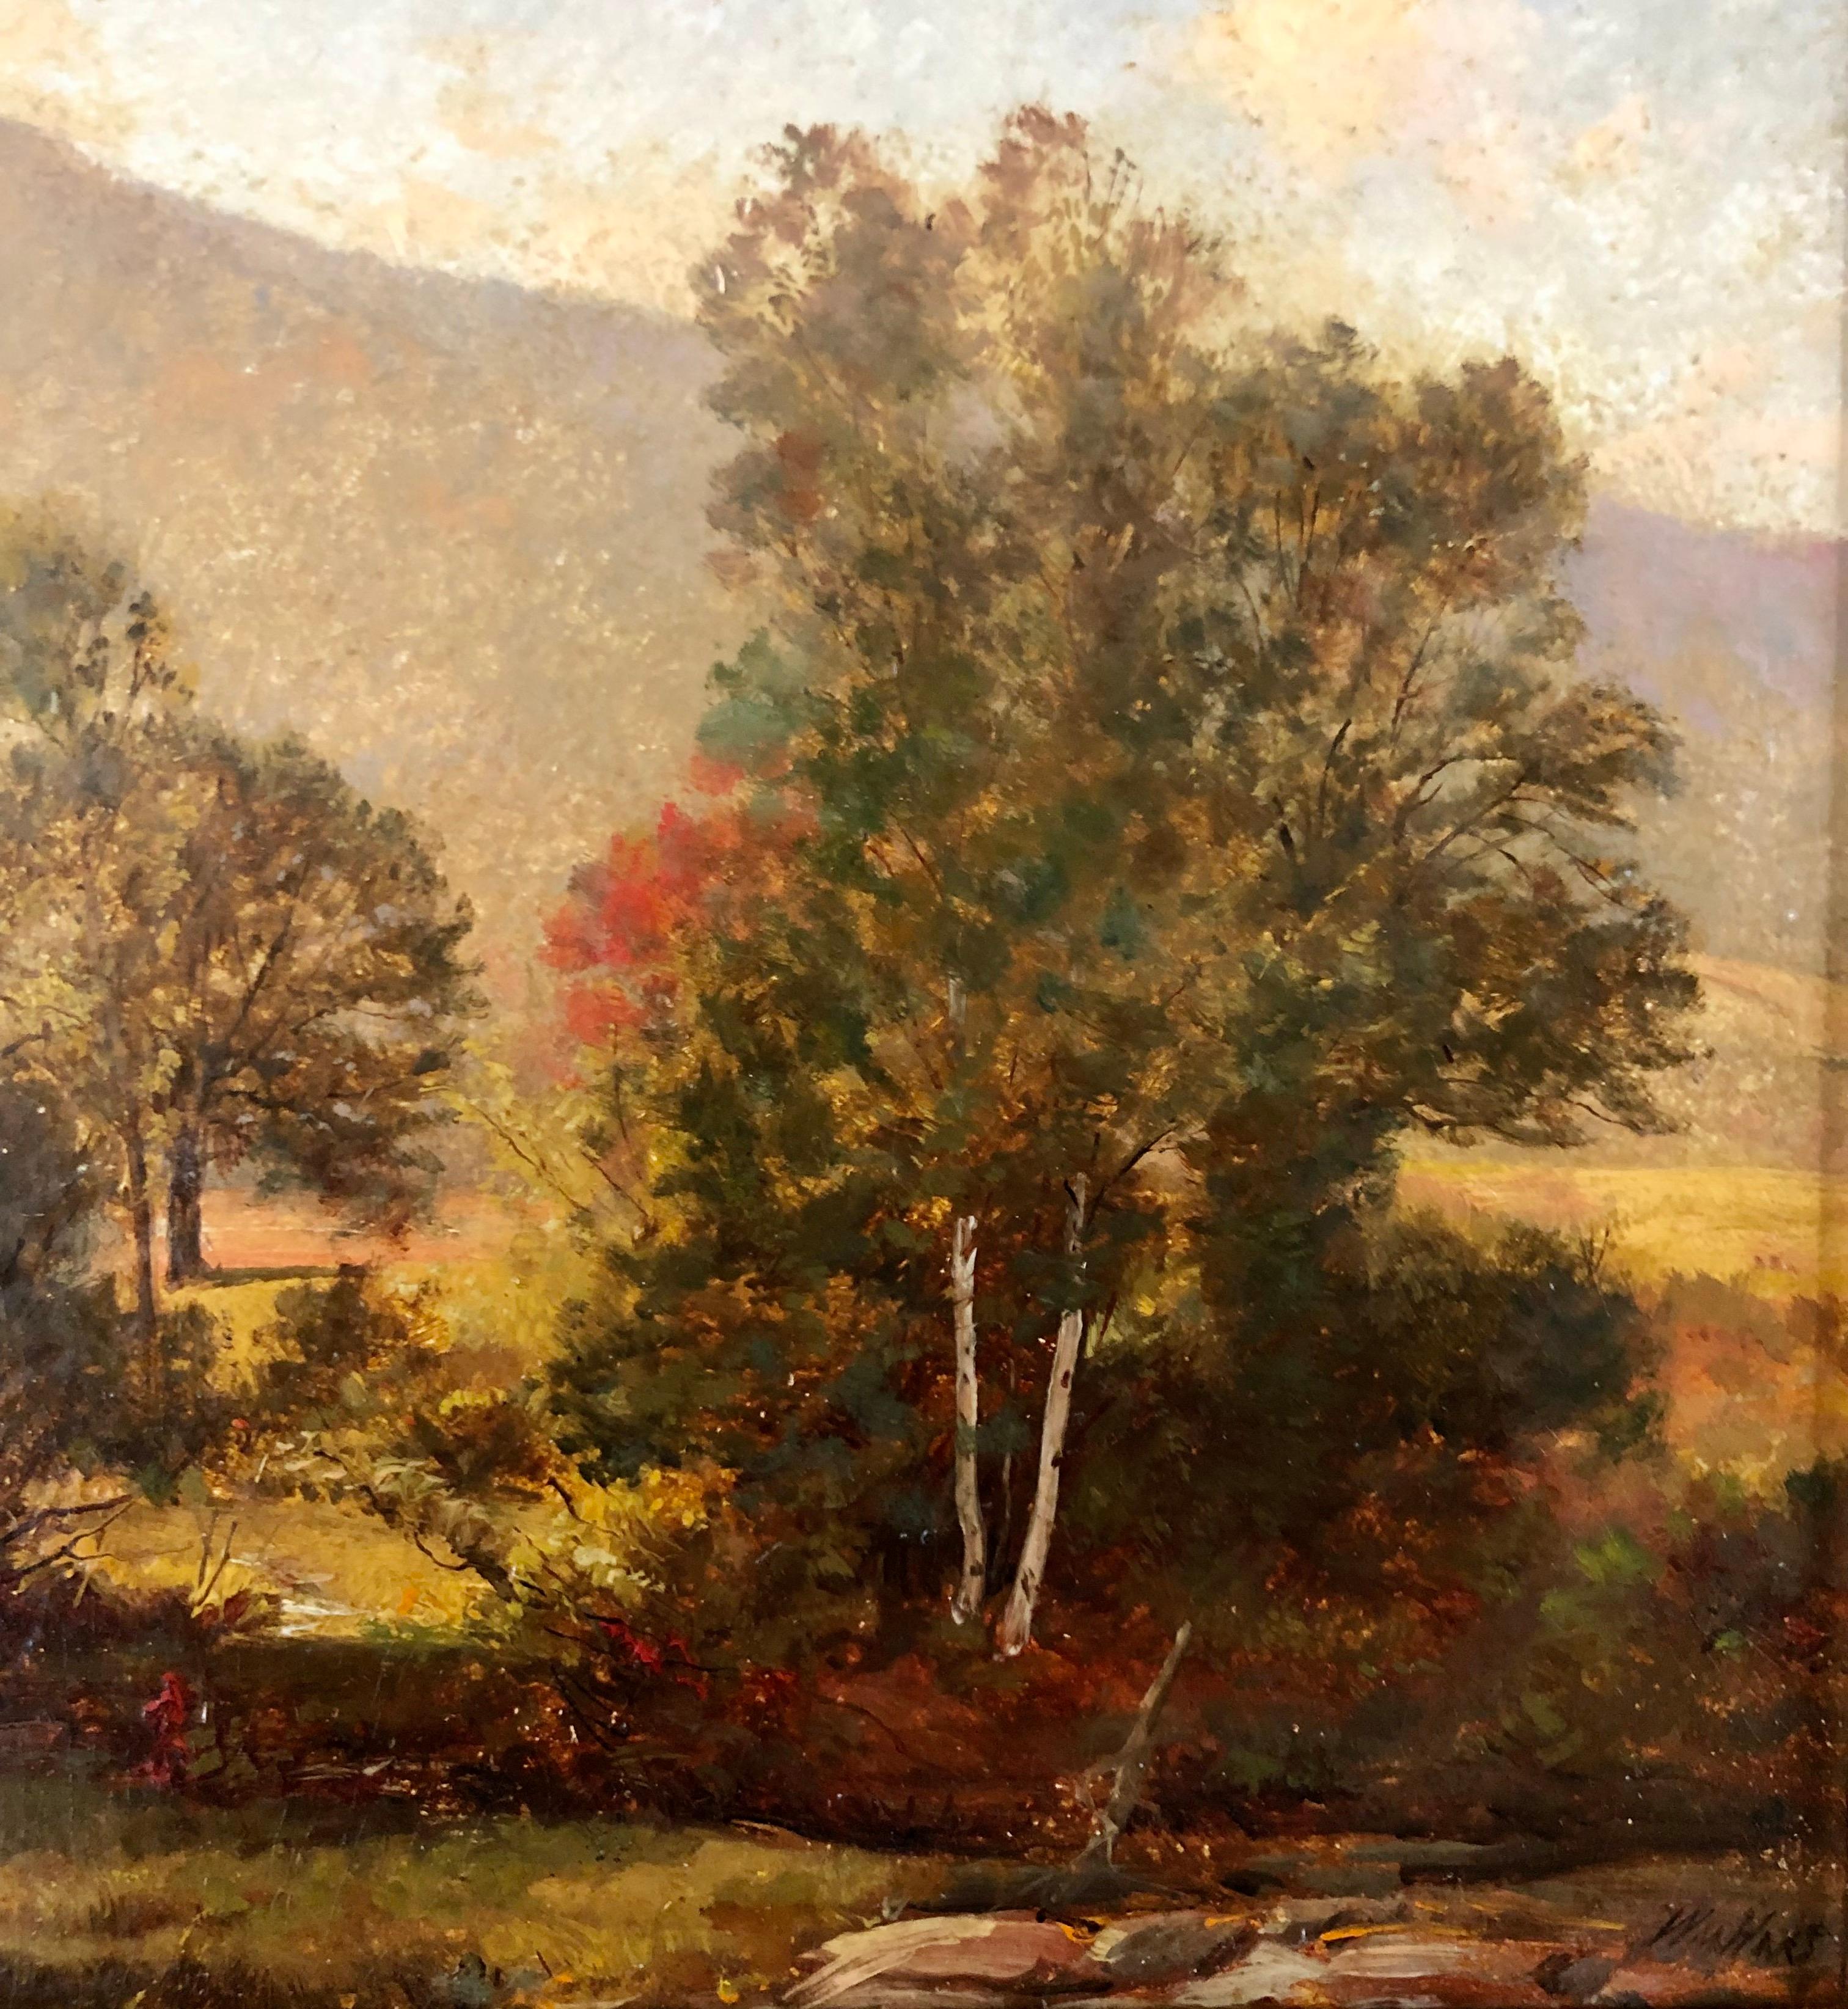 A Glorious Morning in Autumn - Painting by William Hart